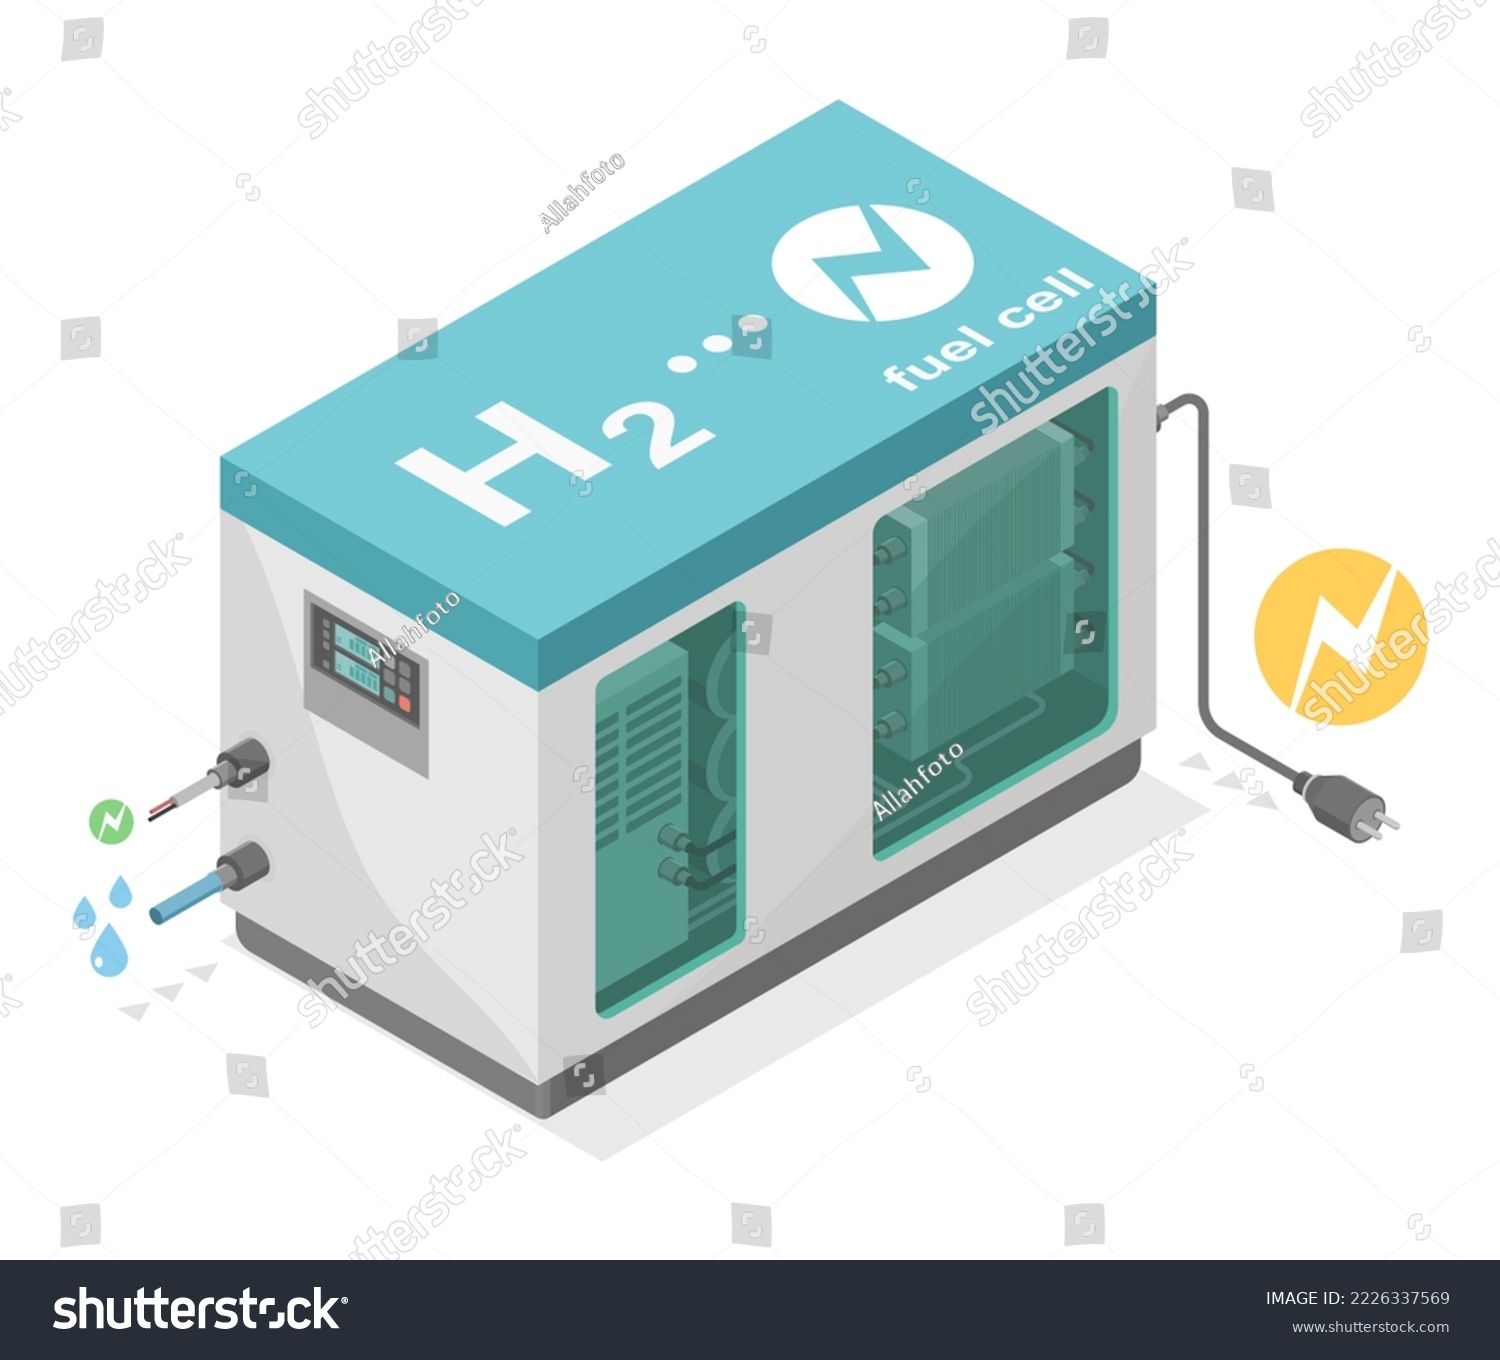 green hydrogen fuel cell h2 
portable energy power plant clean power low emission ecology system diagram isometric infographic vector #2226337569